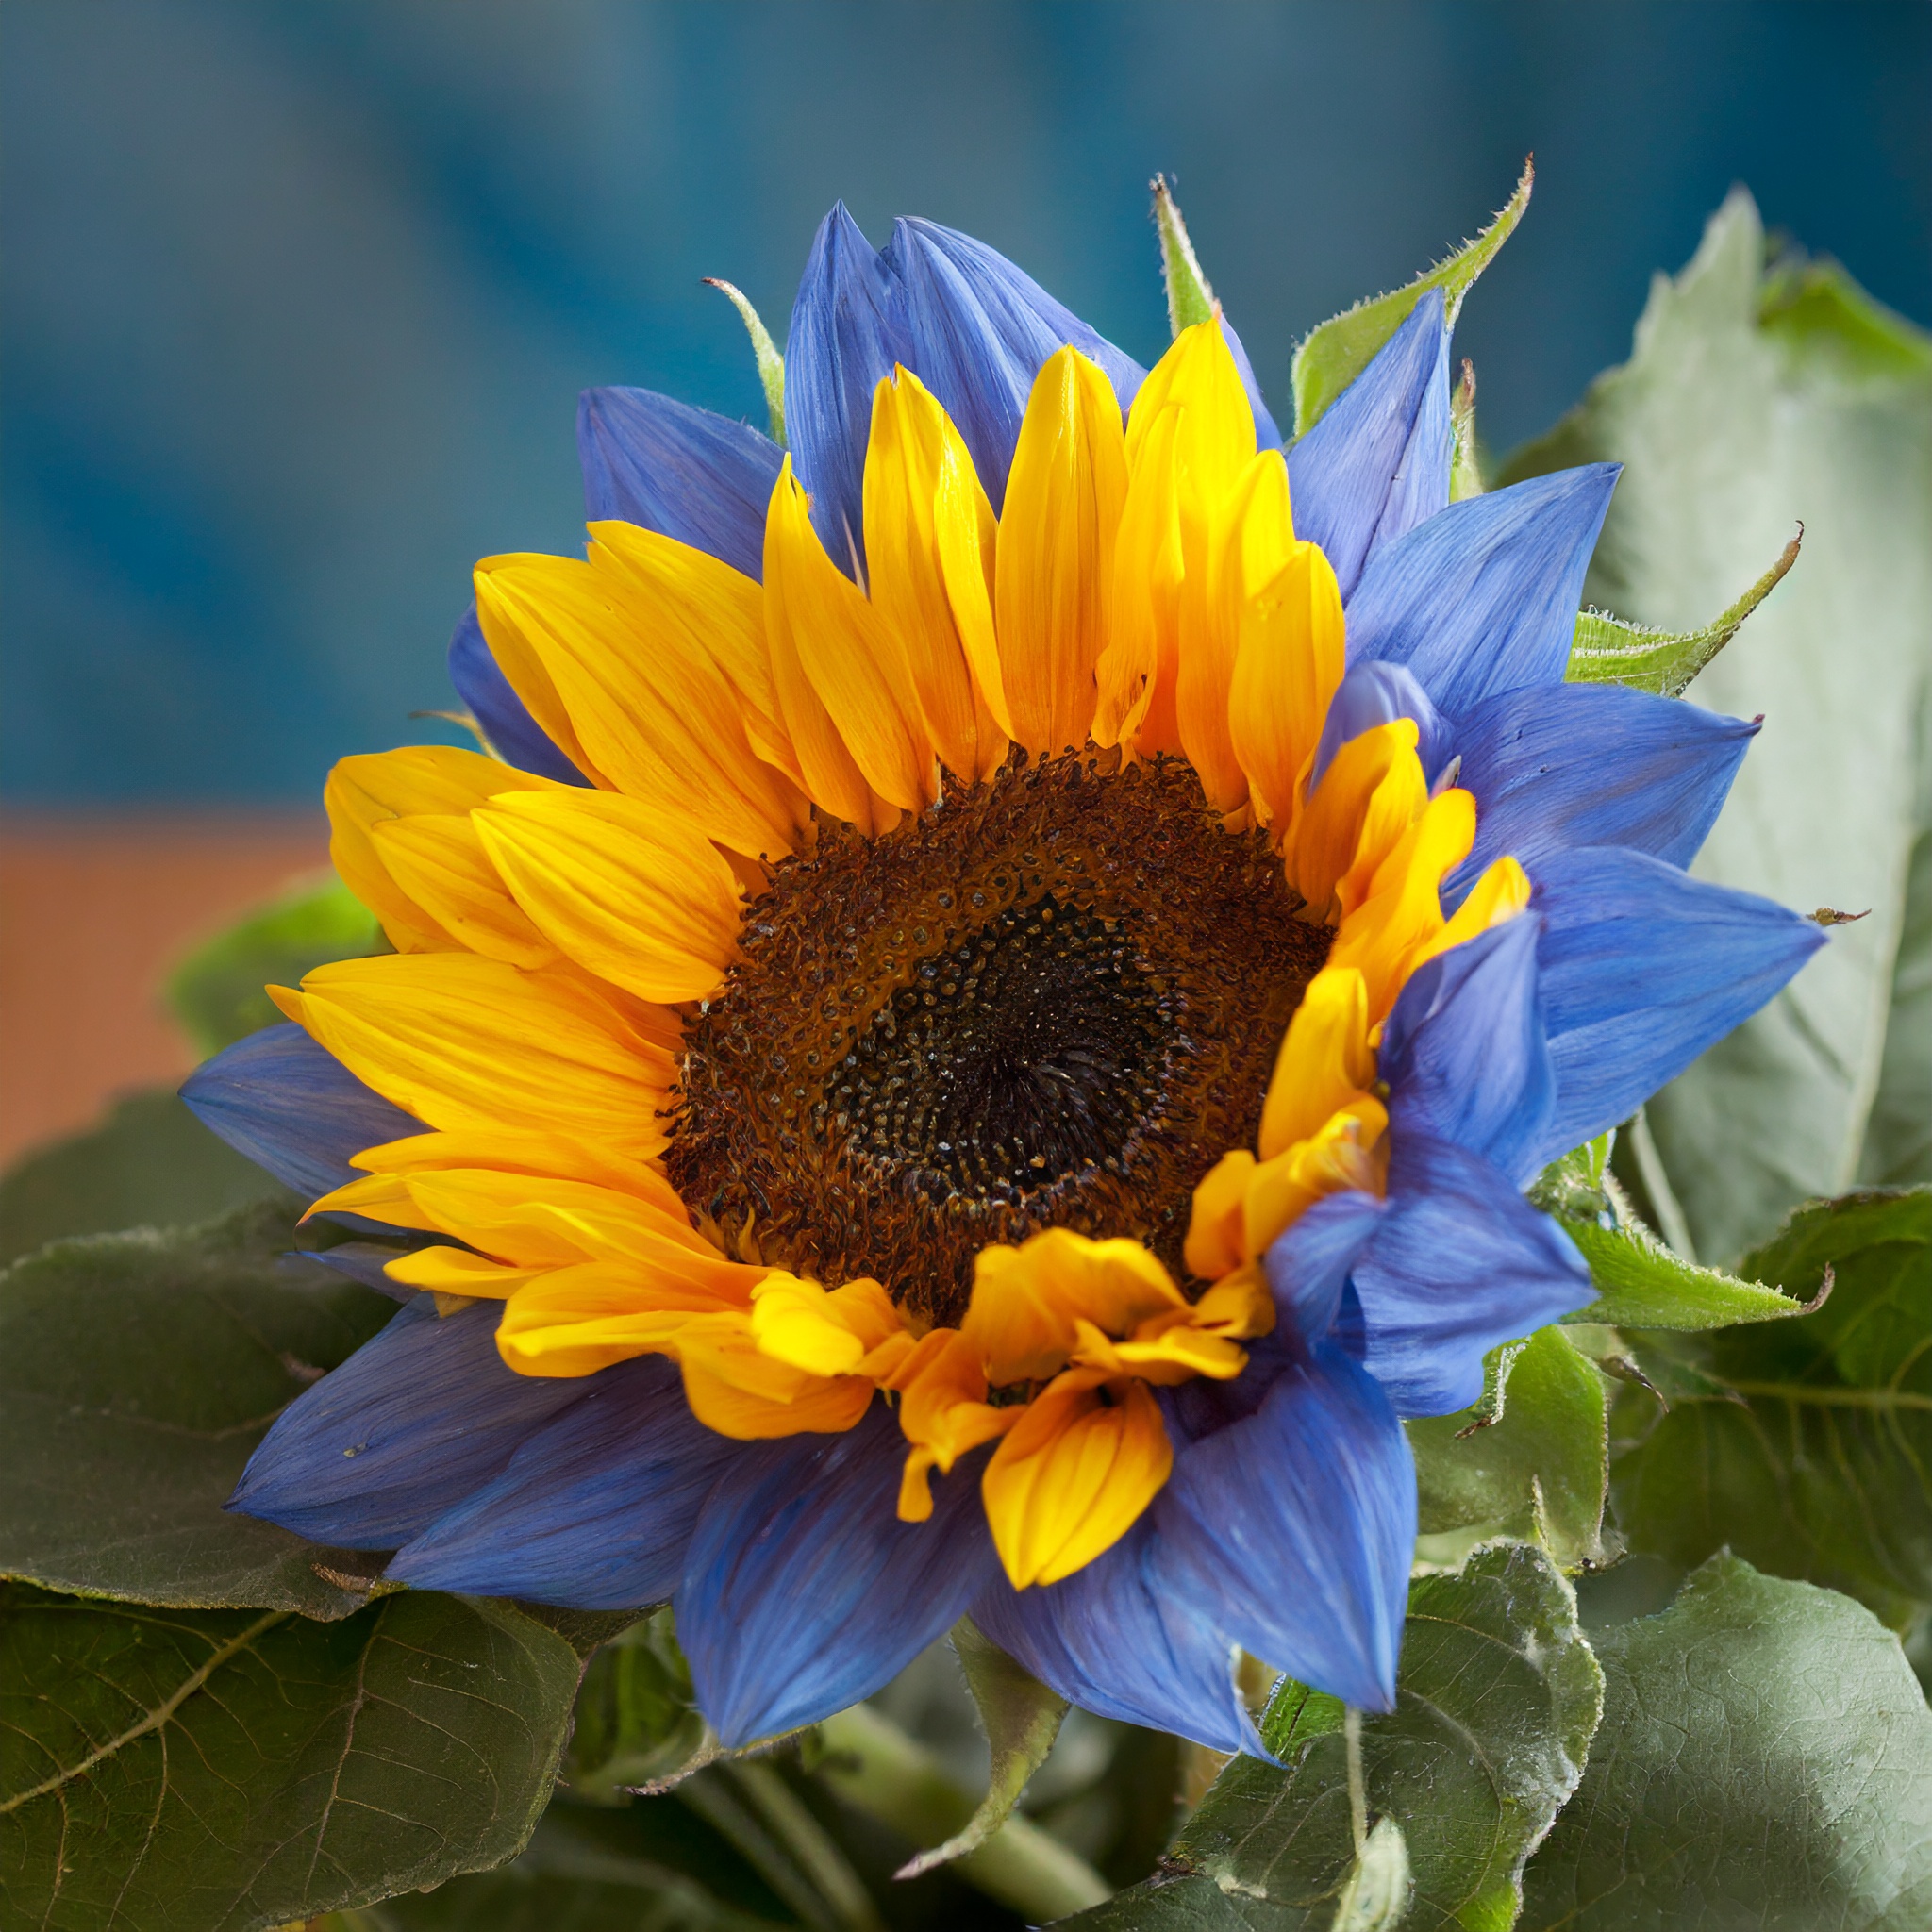 Twin-Blossom Blue Over Yellow Sunflower Seeds